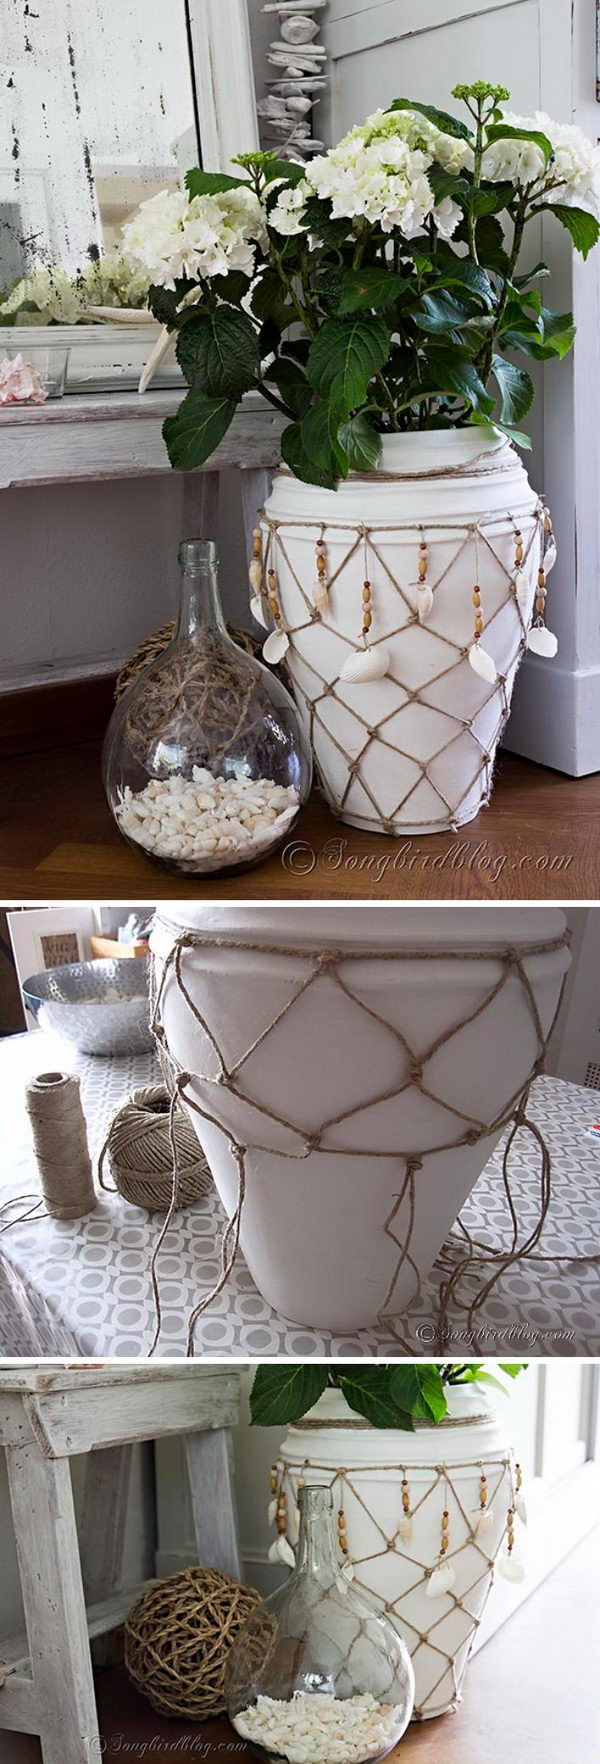 Nautical DIY Decorations
 60 Nautical Decor DIY Ideas To Spruce Up Your Home Hative